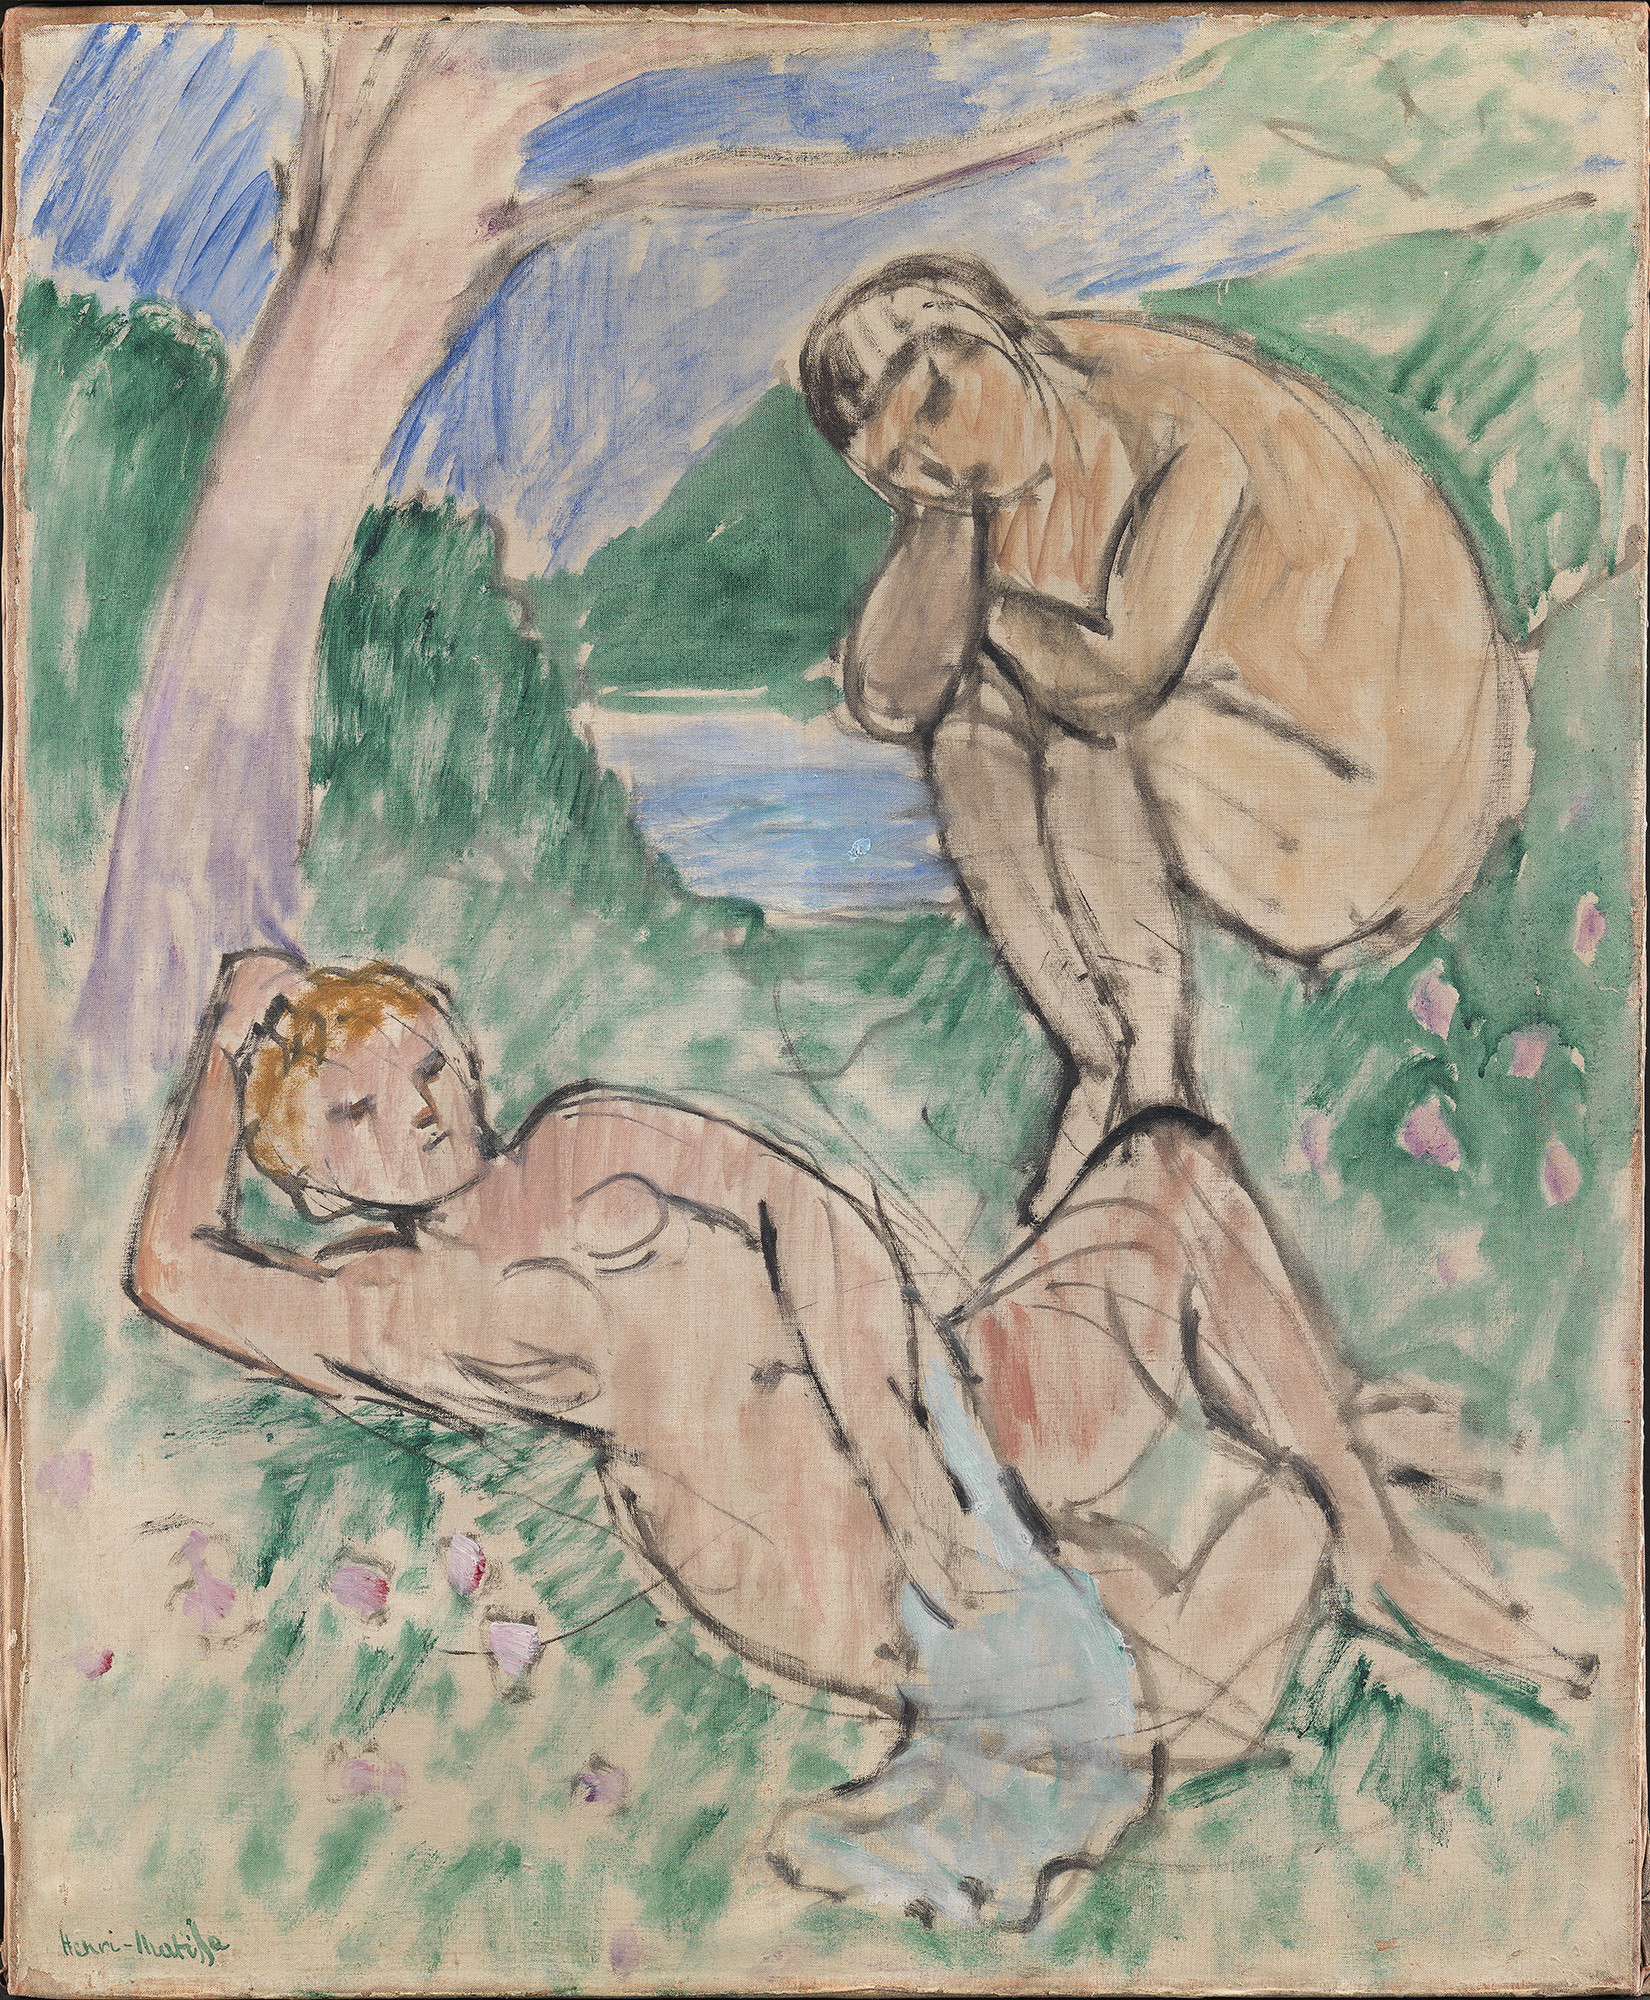 Henri Matisse. *Bathers*. 1907. Oil on canvas, 28 3/4” × 23 1/4” (73 × 59 cm). Gift of the Augustinus Foundation and the New Carlsberg Foundation. SMK – The National Gallery of Denmark, Copenhagen. © 2022 Succession H. Matisse / Artists Rights Society (ARS), New York